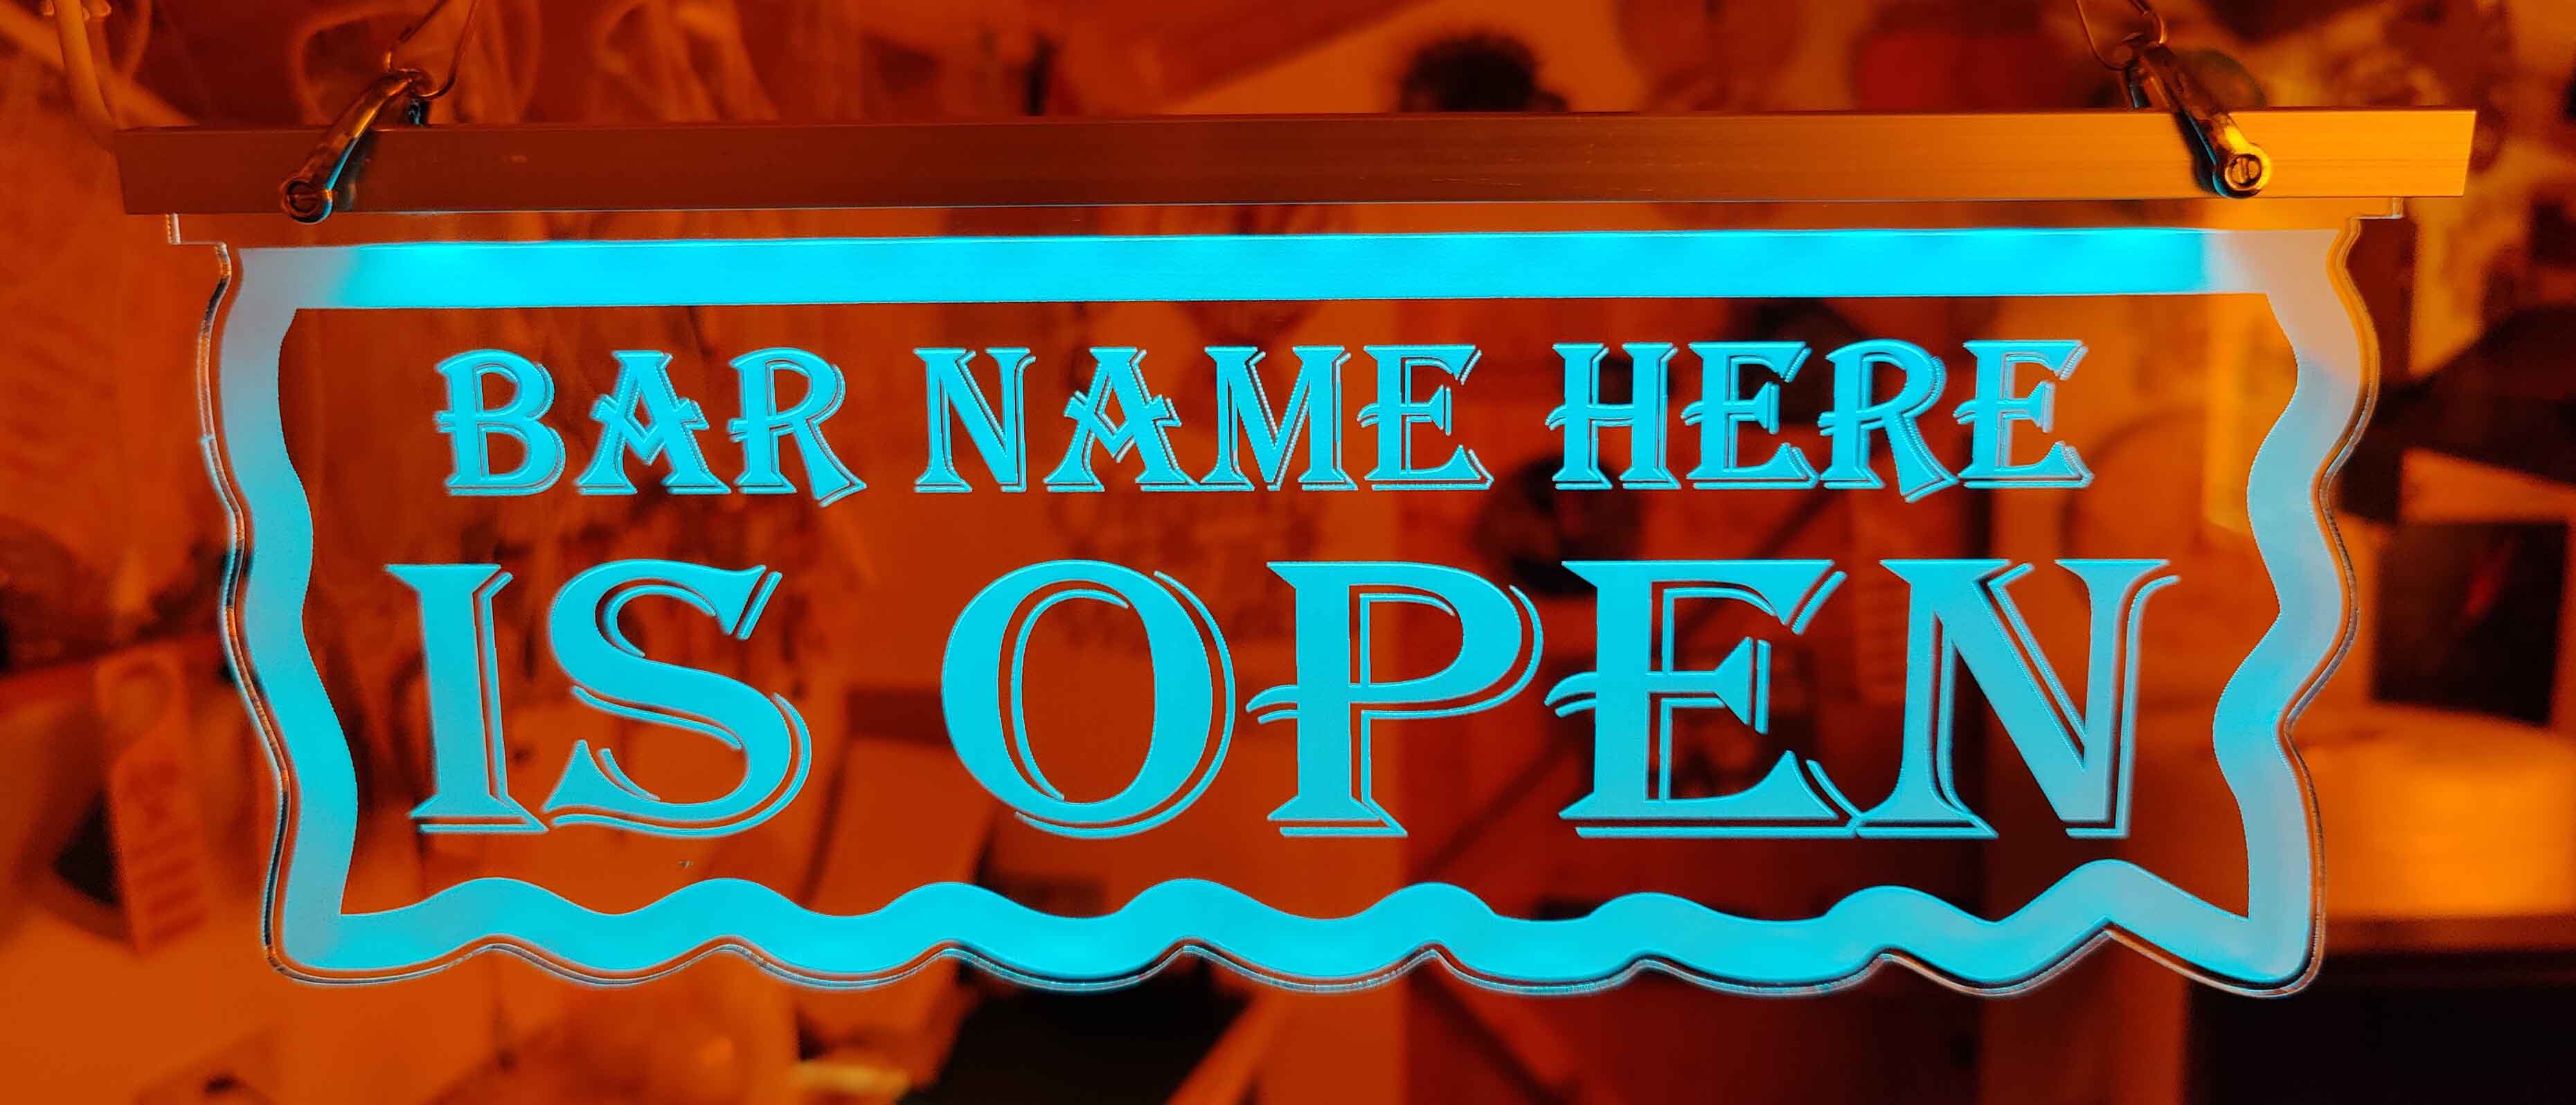 personalised bar name we are open light up led sign